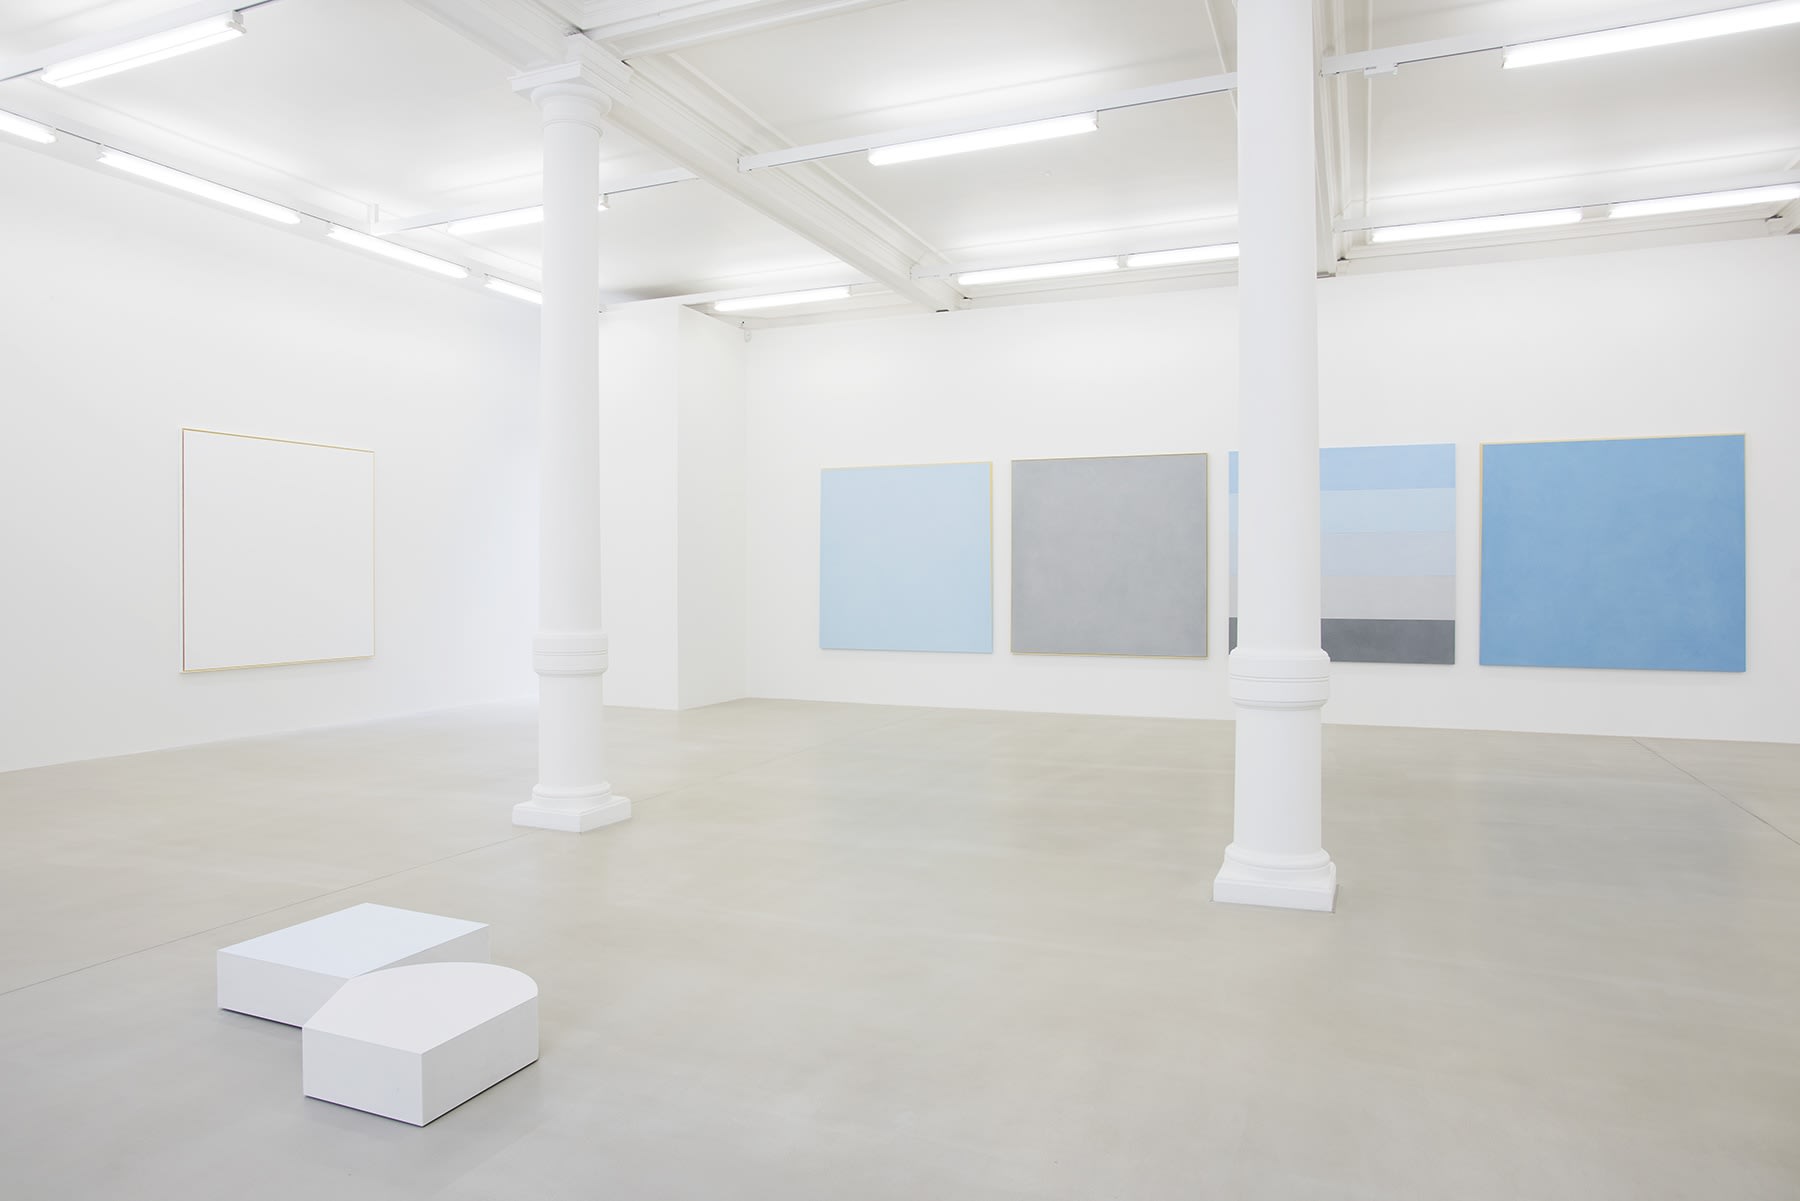 Various paintings of light shades (blue, grey, white) line the walls of an all white space, with short white sculptures on the floor.